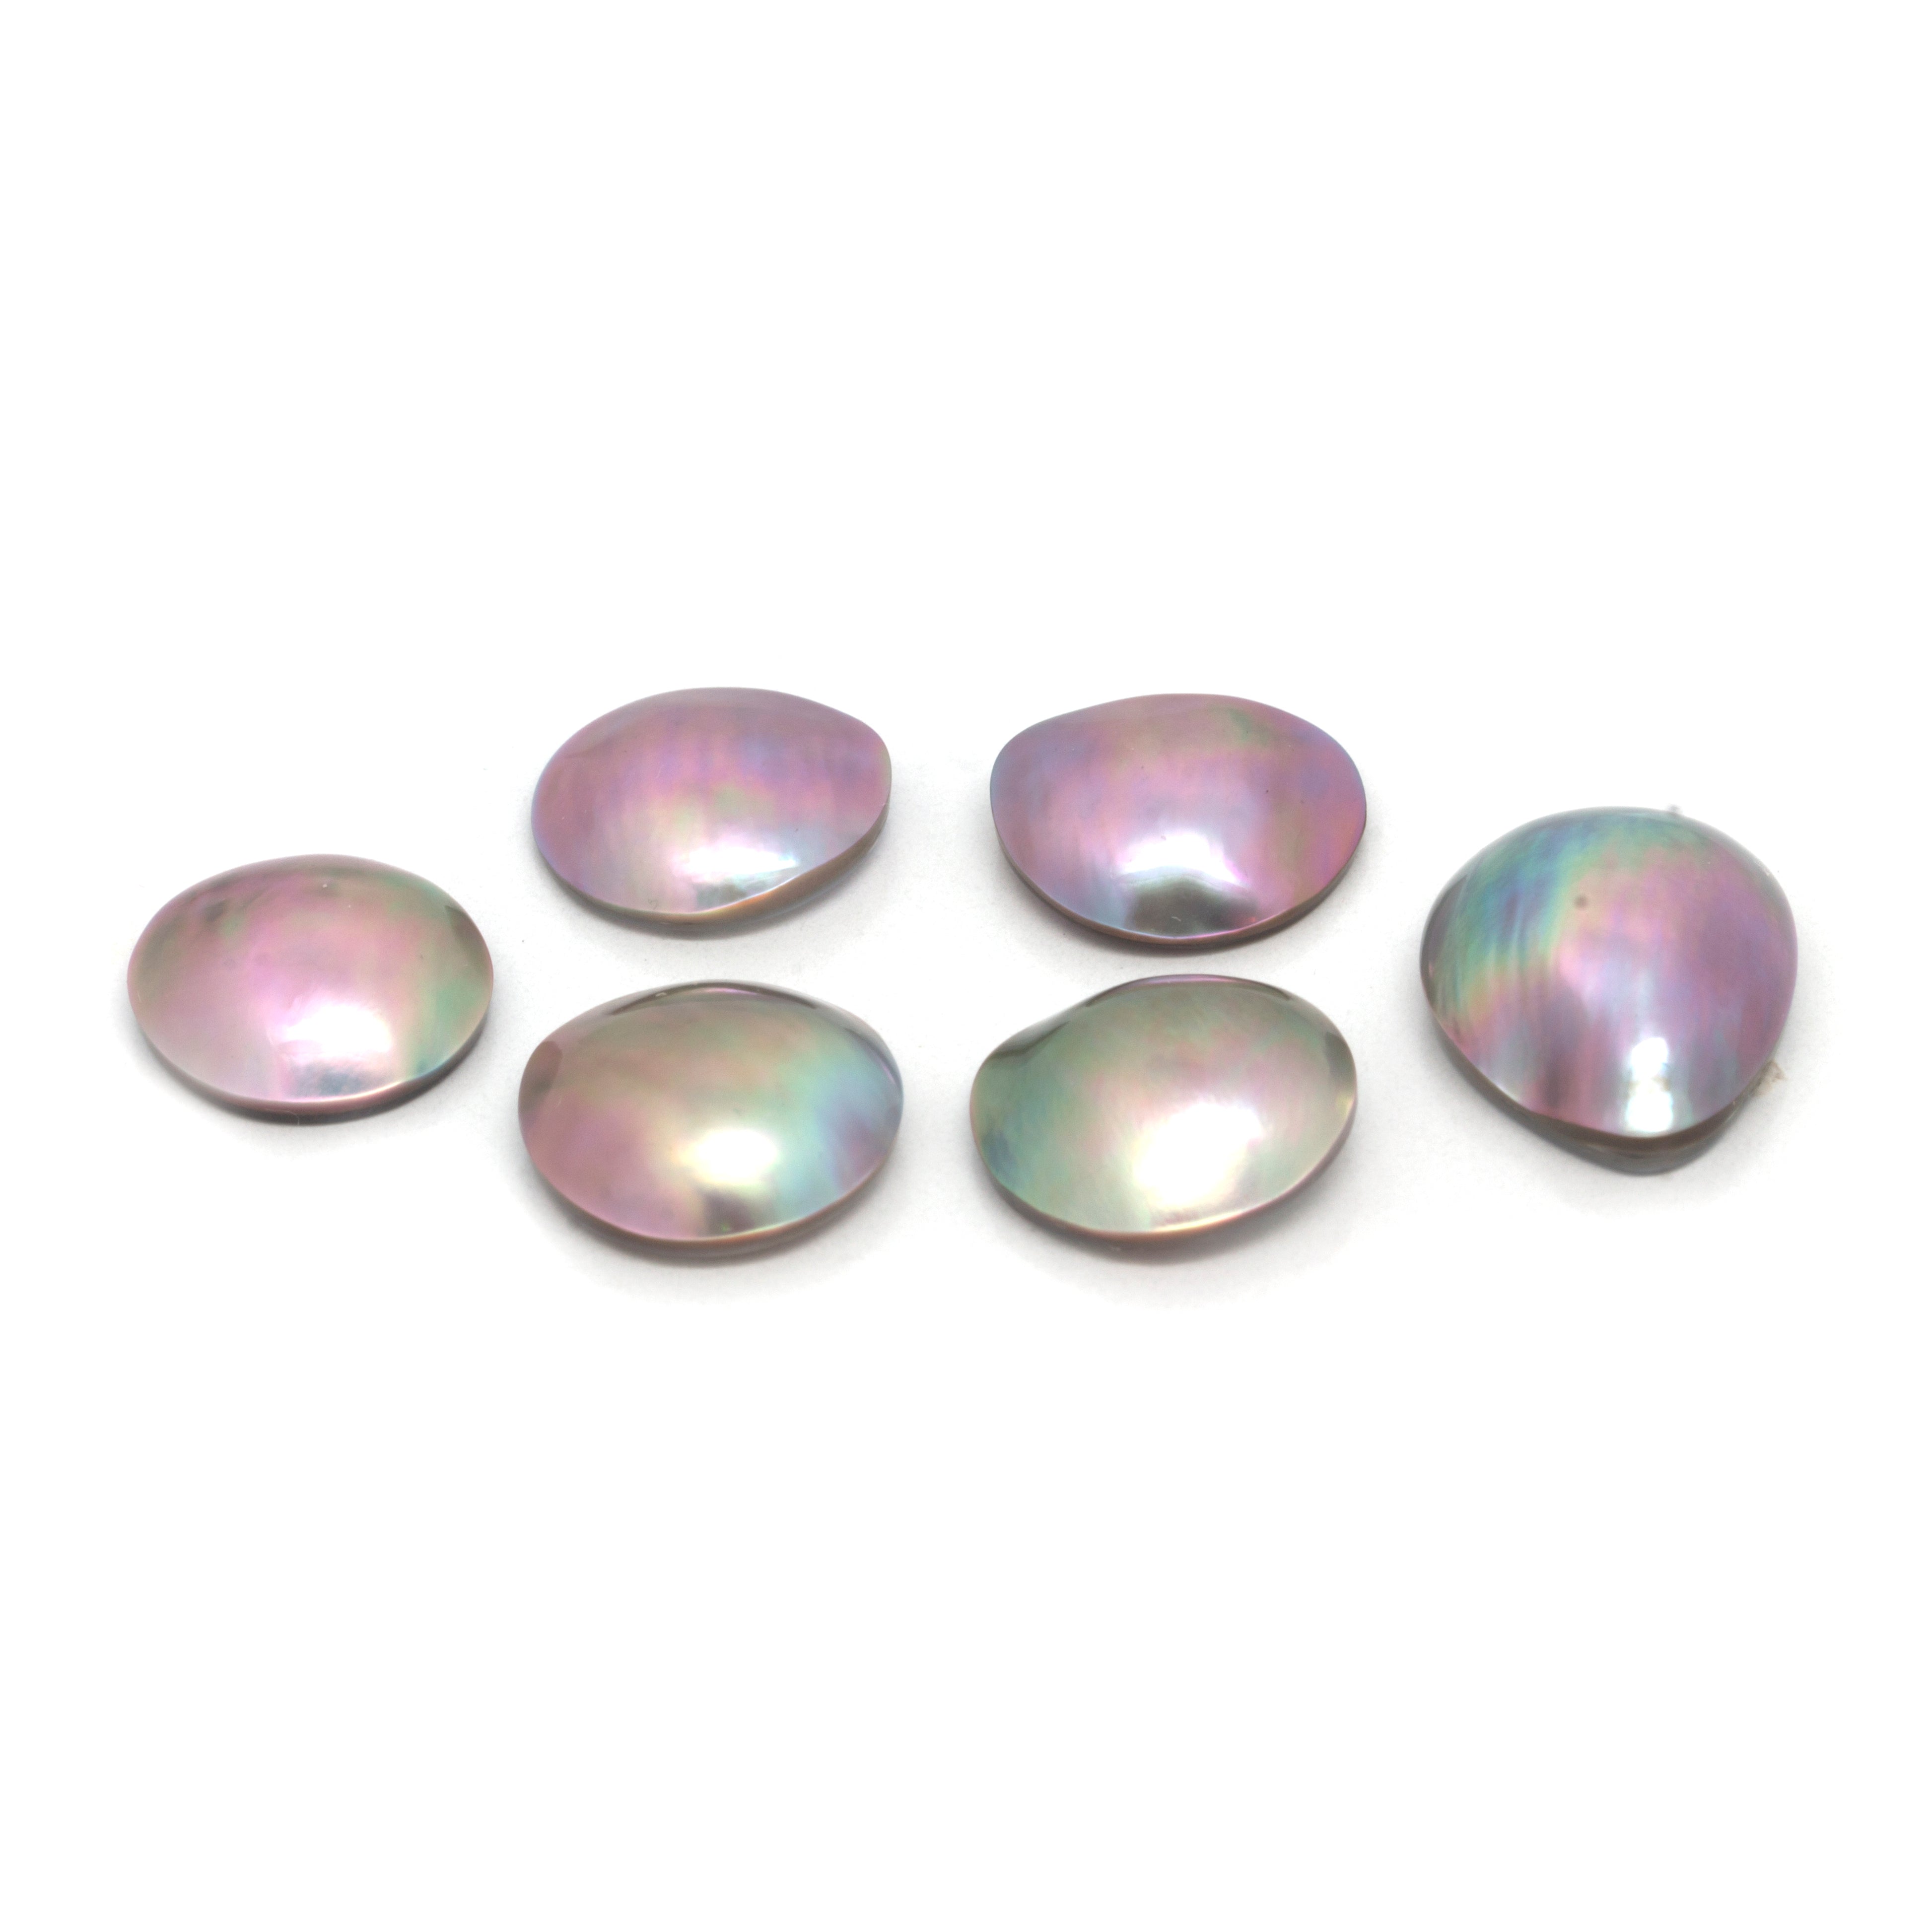 SET of 6 Cortez Mabe Pearls A and AA grade